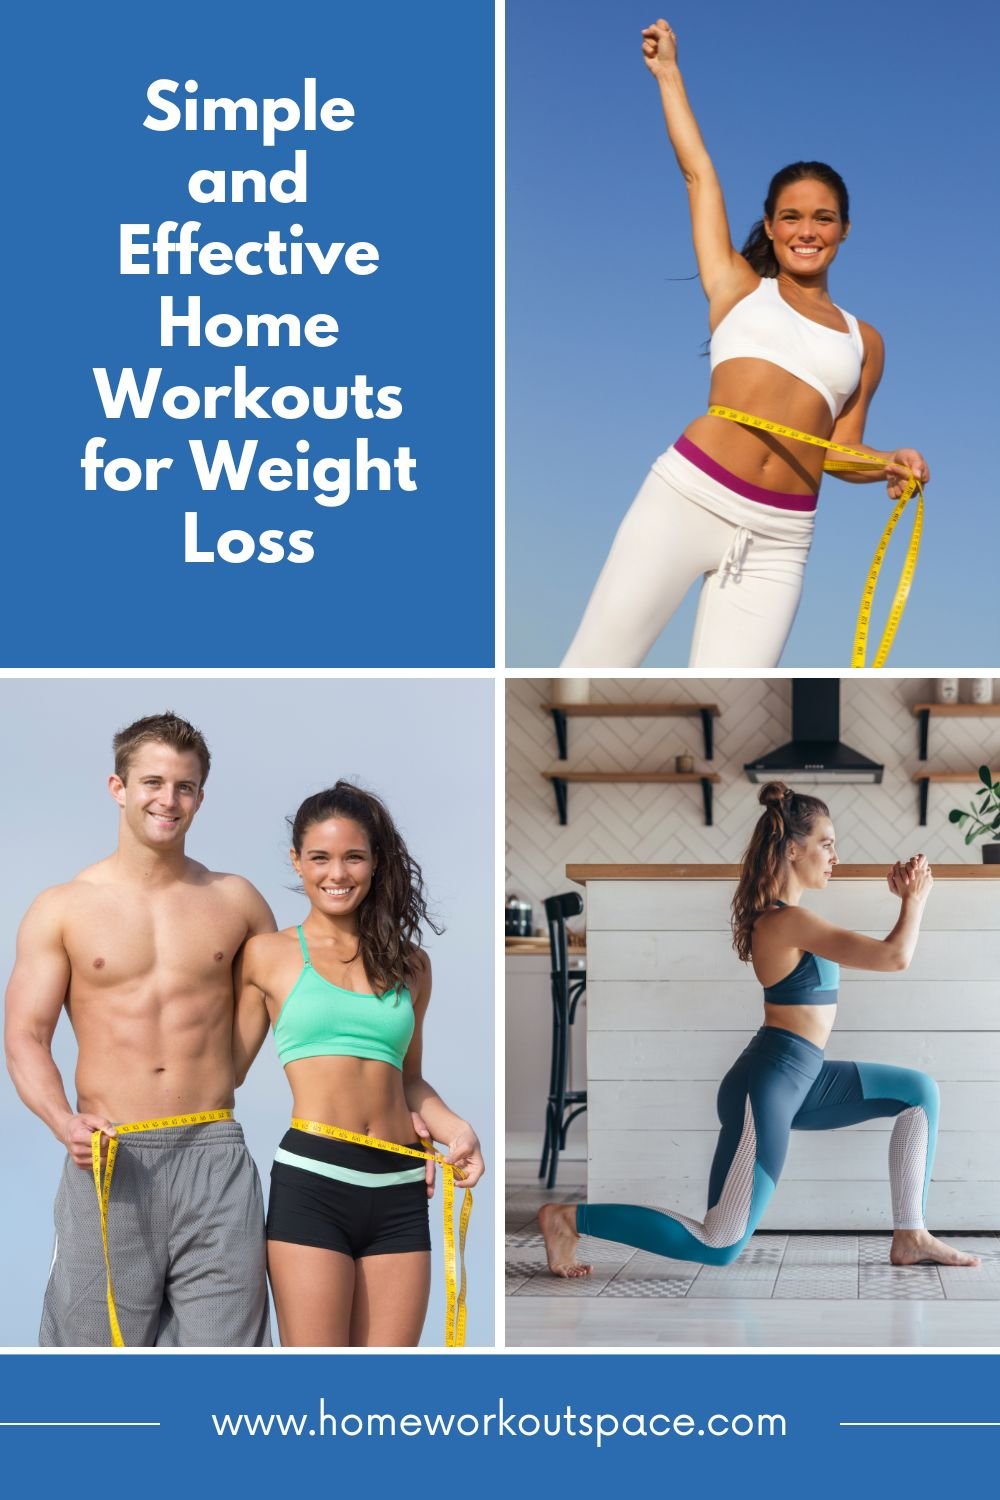 Home Workouts for Weight Loss